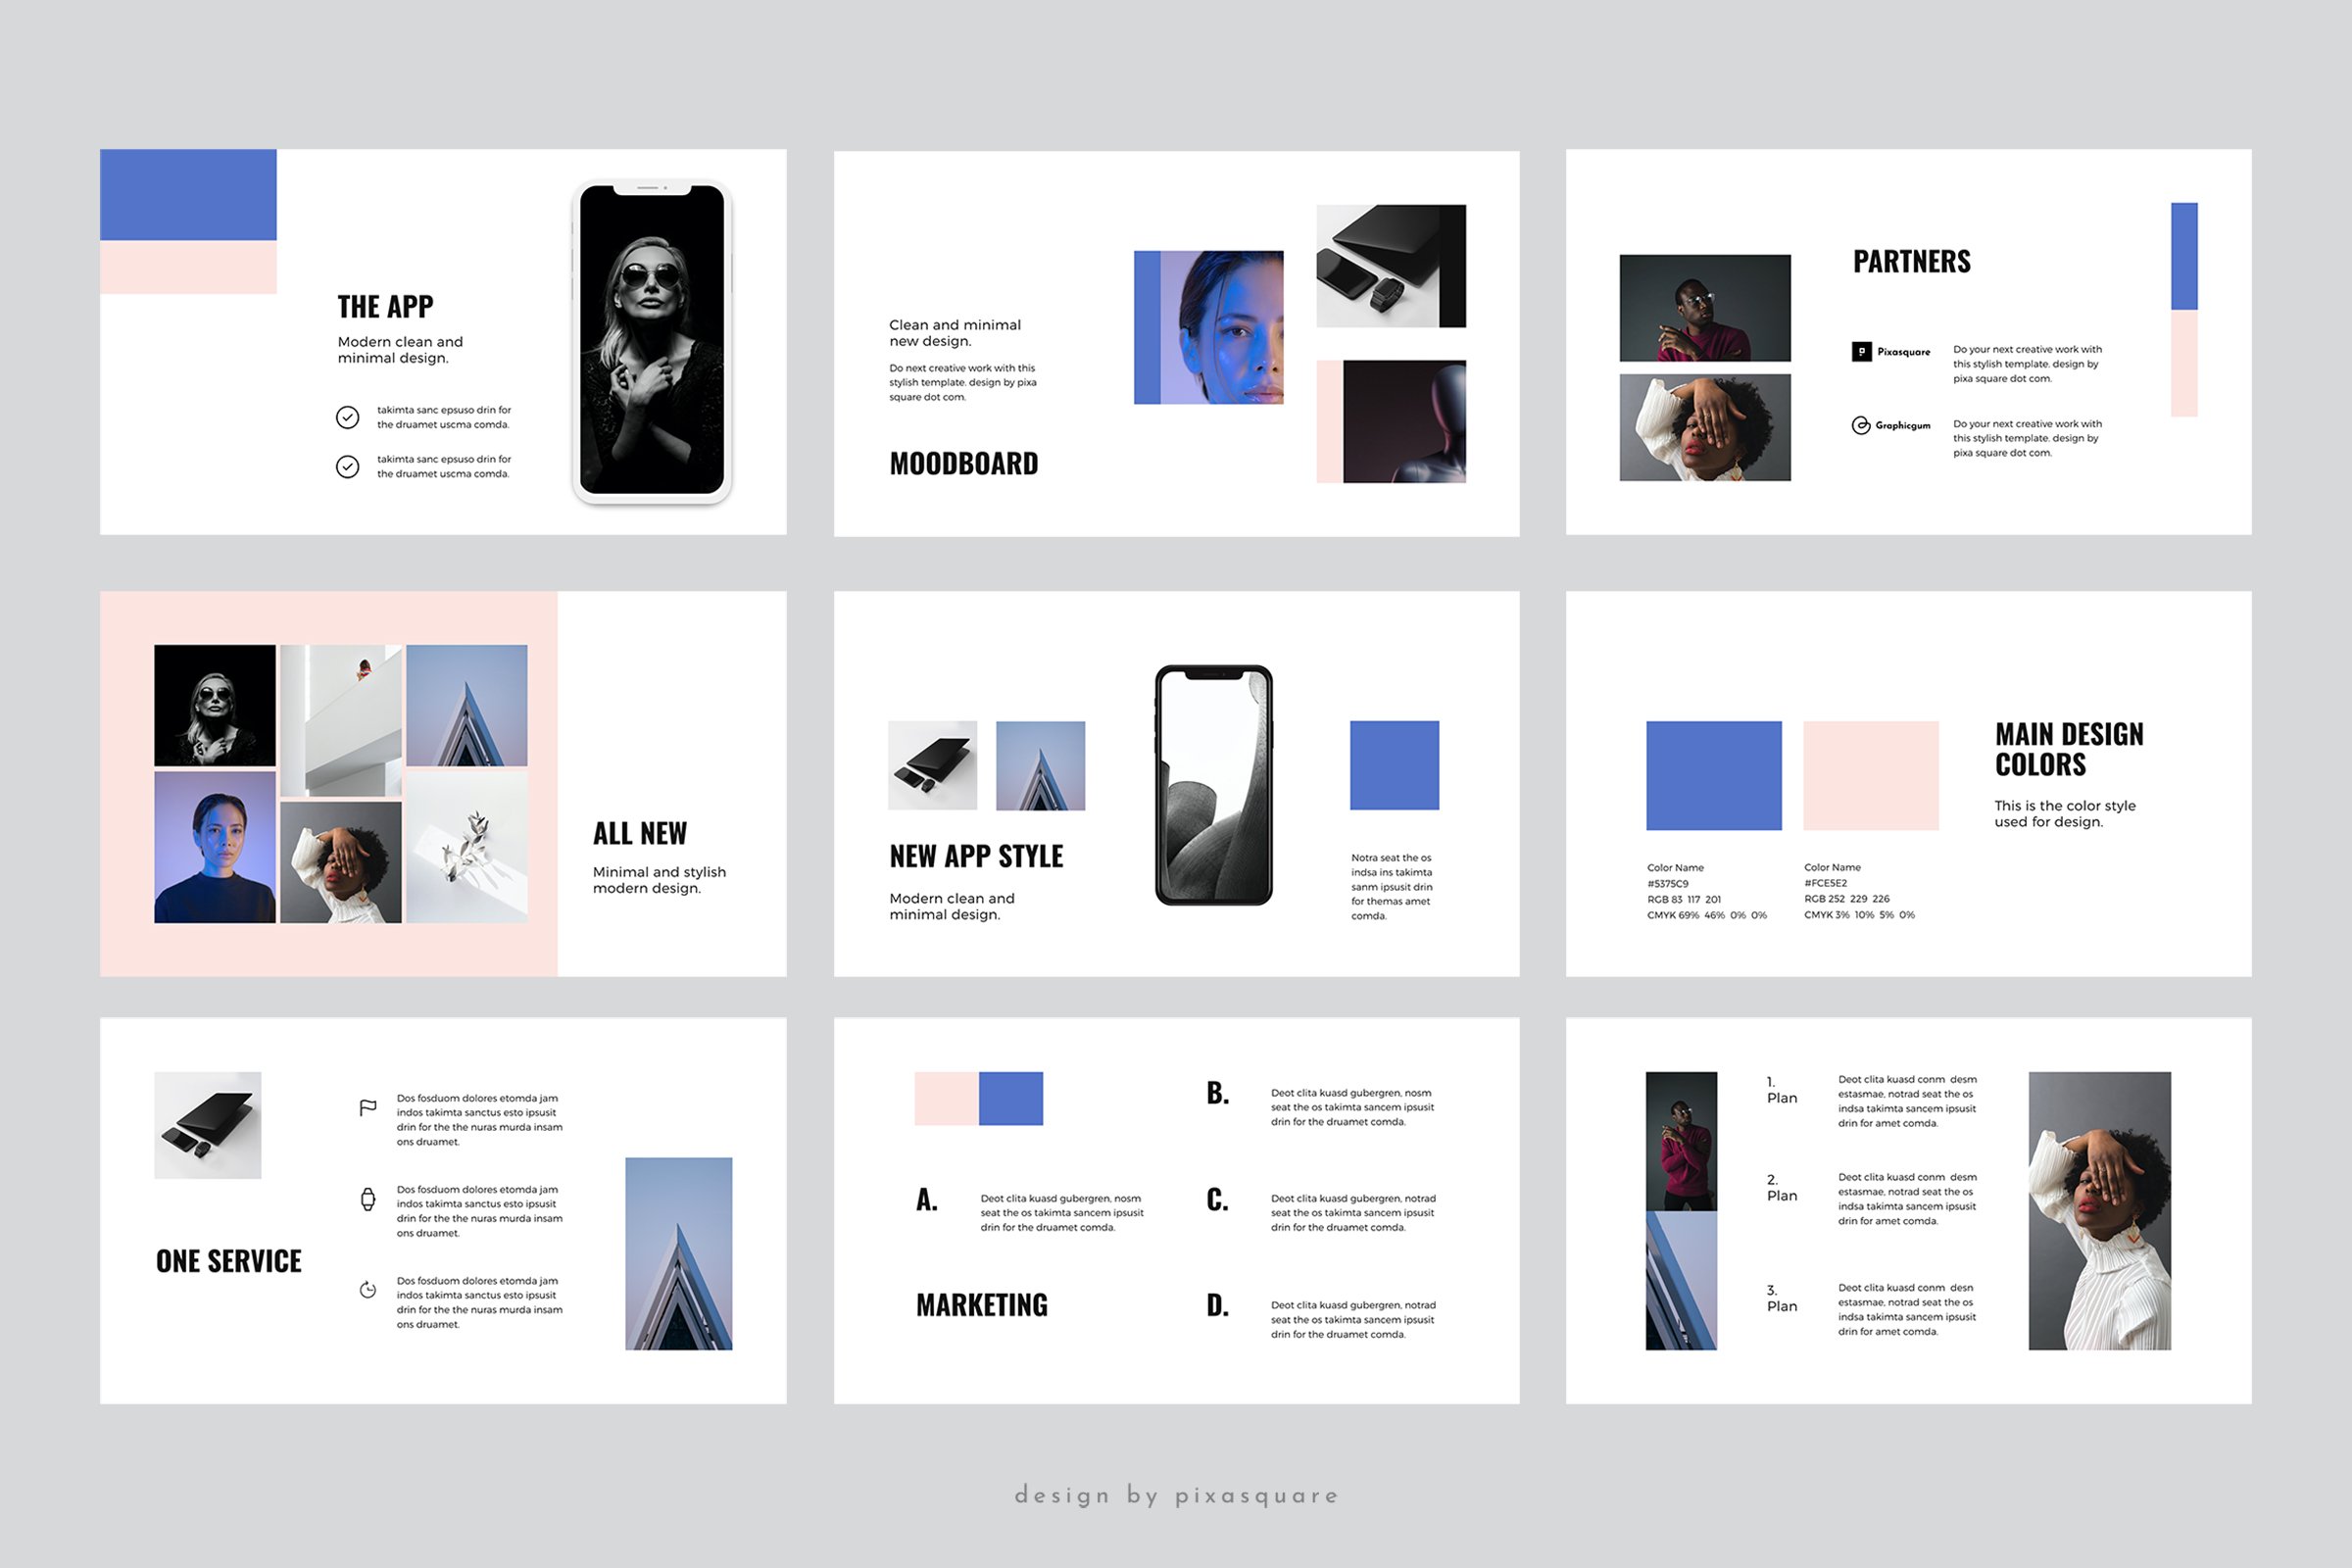 Pola is a mobile friendly template.